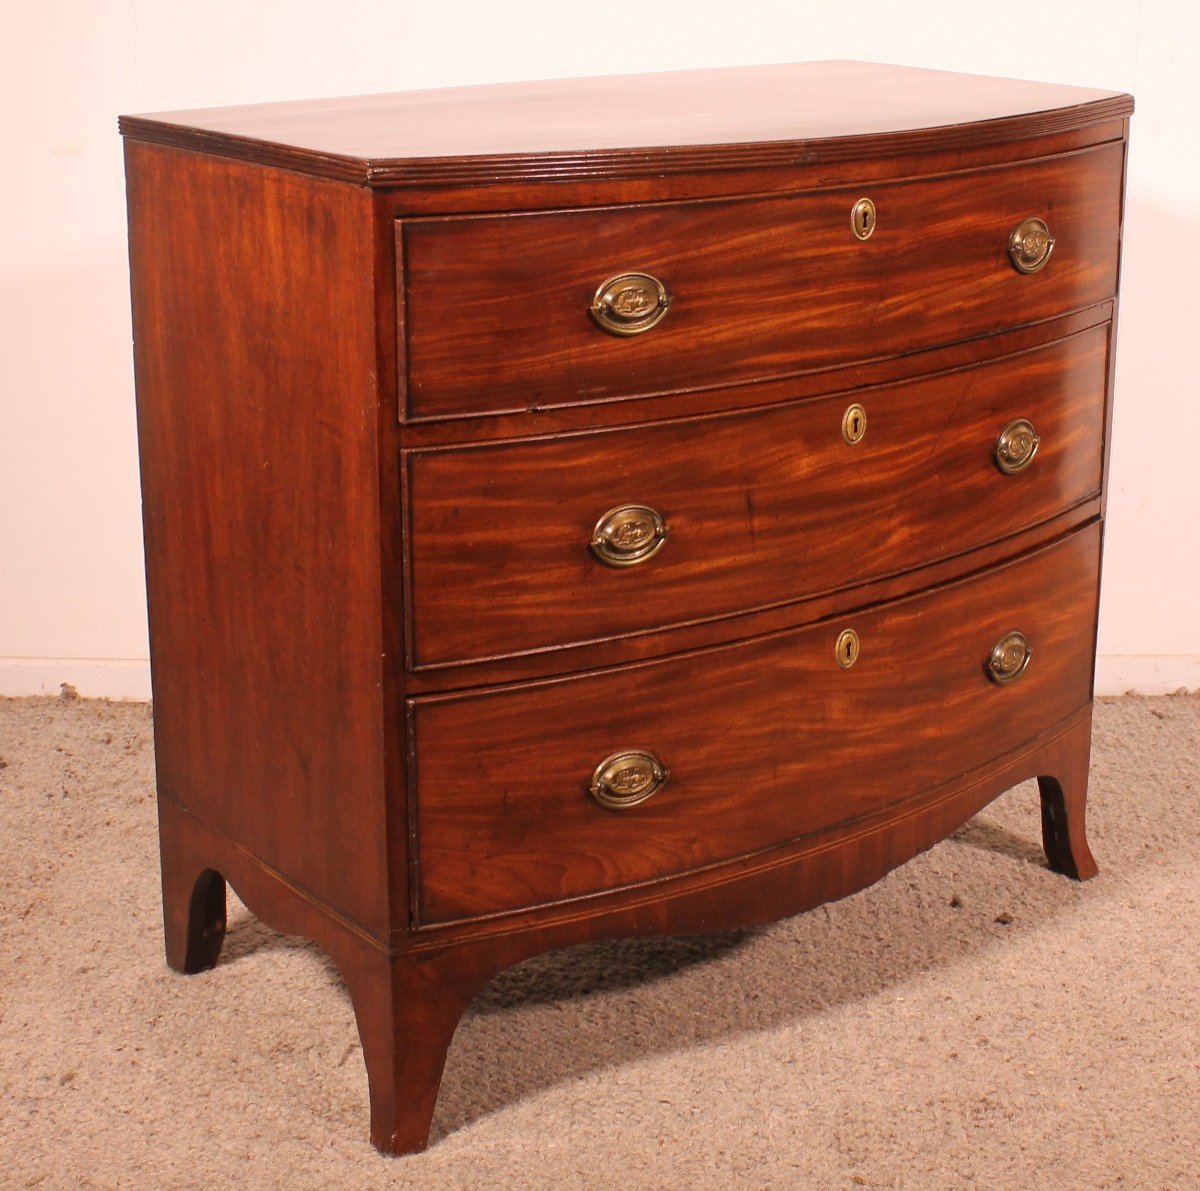 Small Bowfront Mahogany Chest Of Drawers Regency Period -photo-1